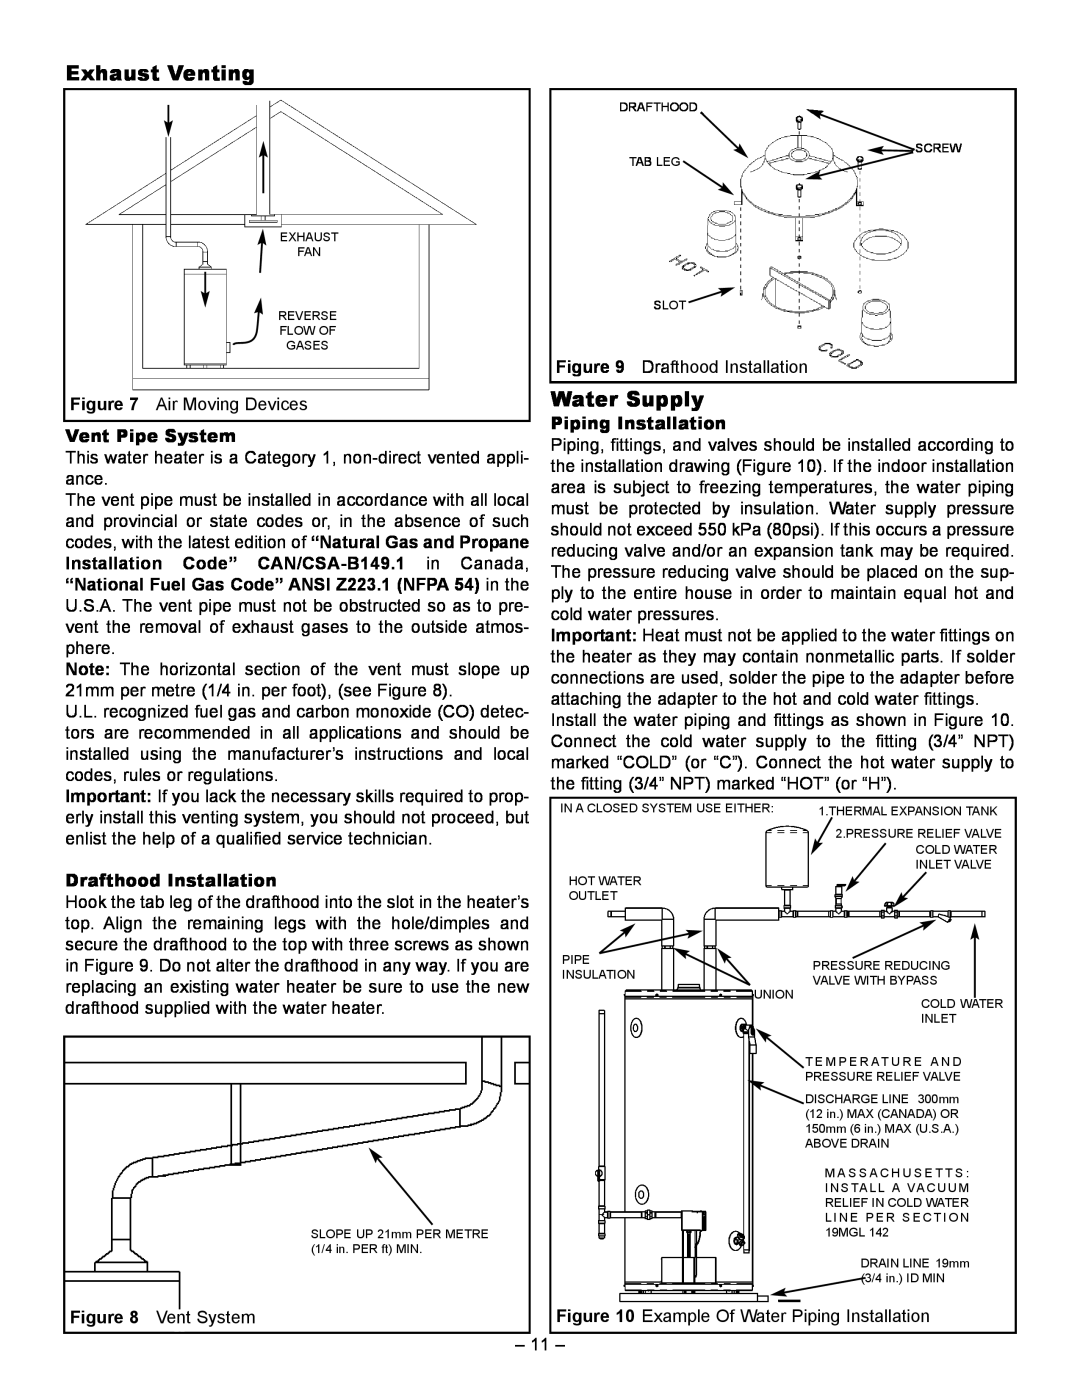 GSW 72090 manual Exhaust Venting, Water Supply 